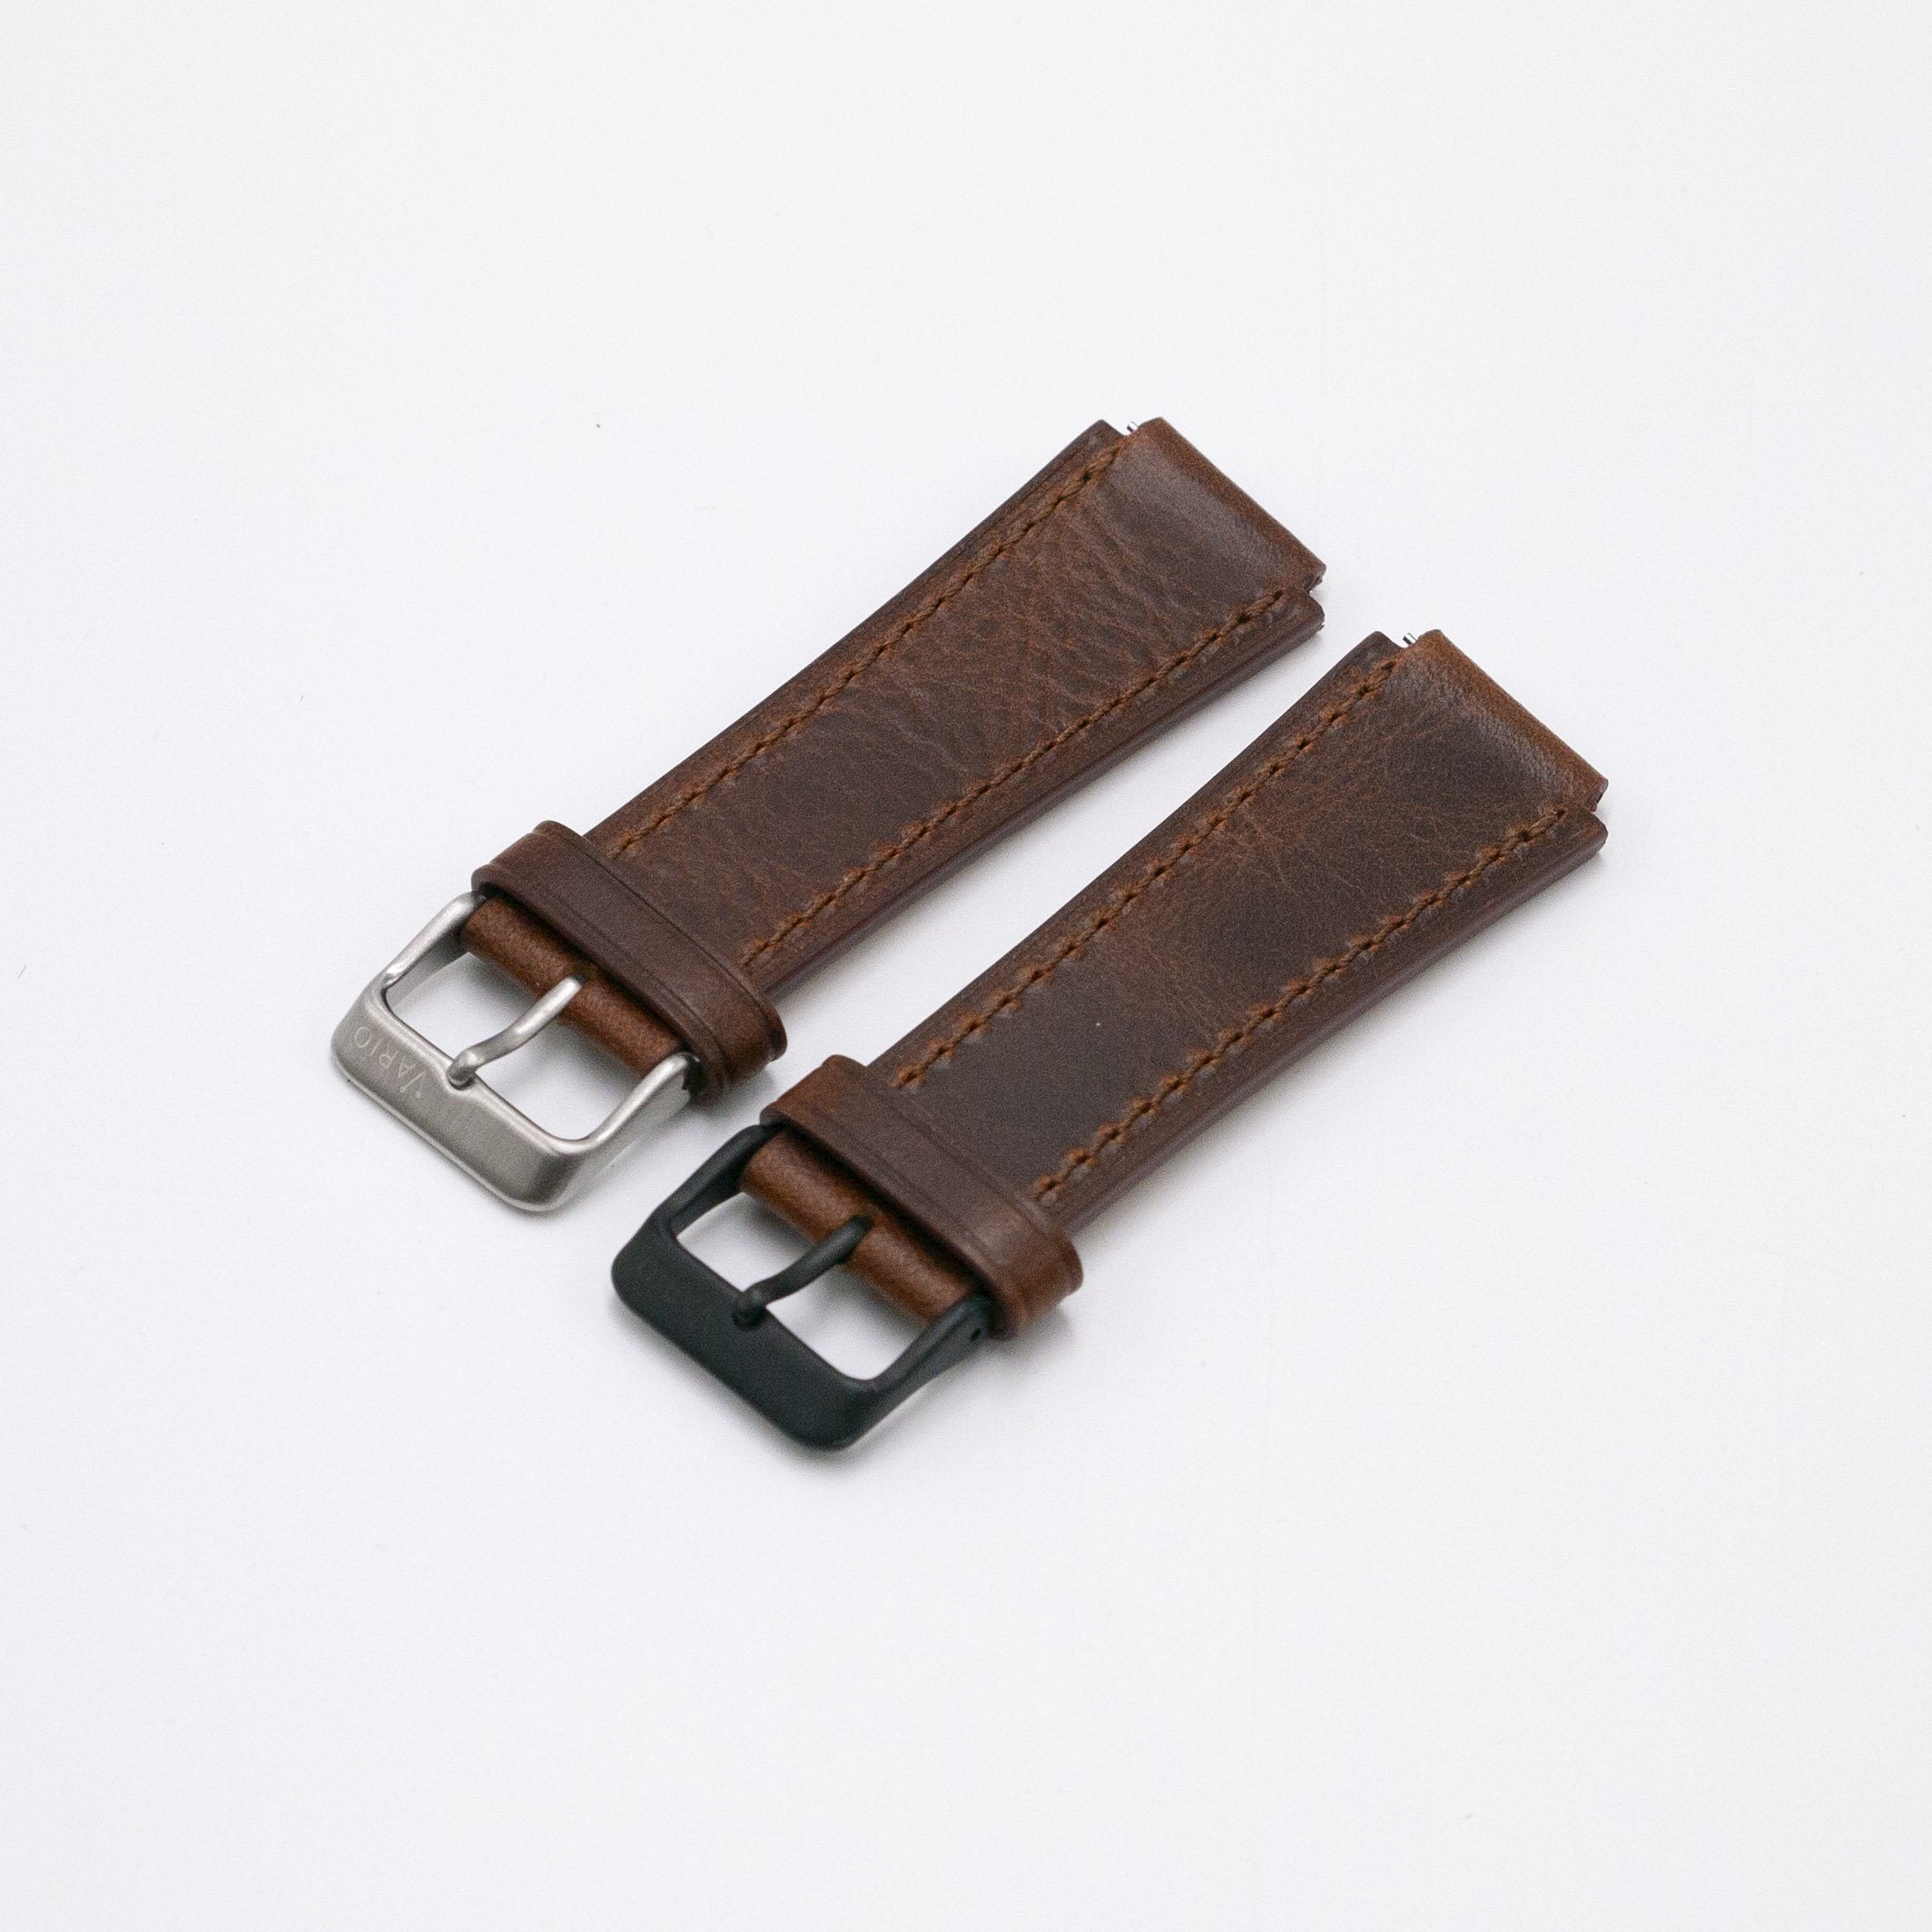 Oiled Leather Camel Brown Watch Strap for Casio AE1200WH World Time Watch